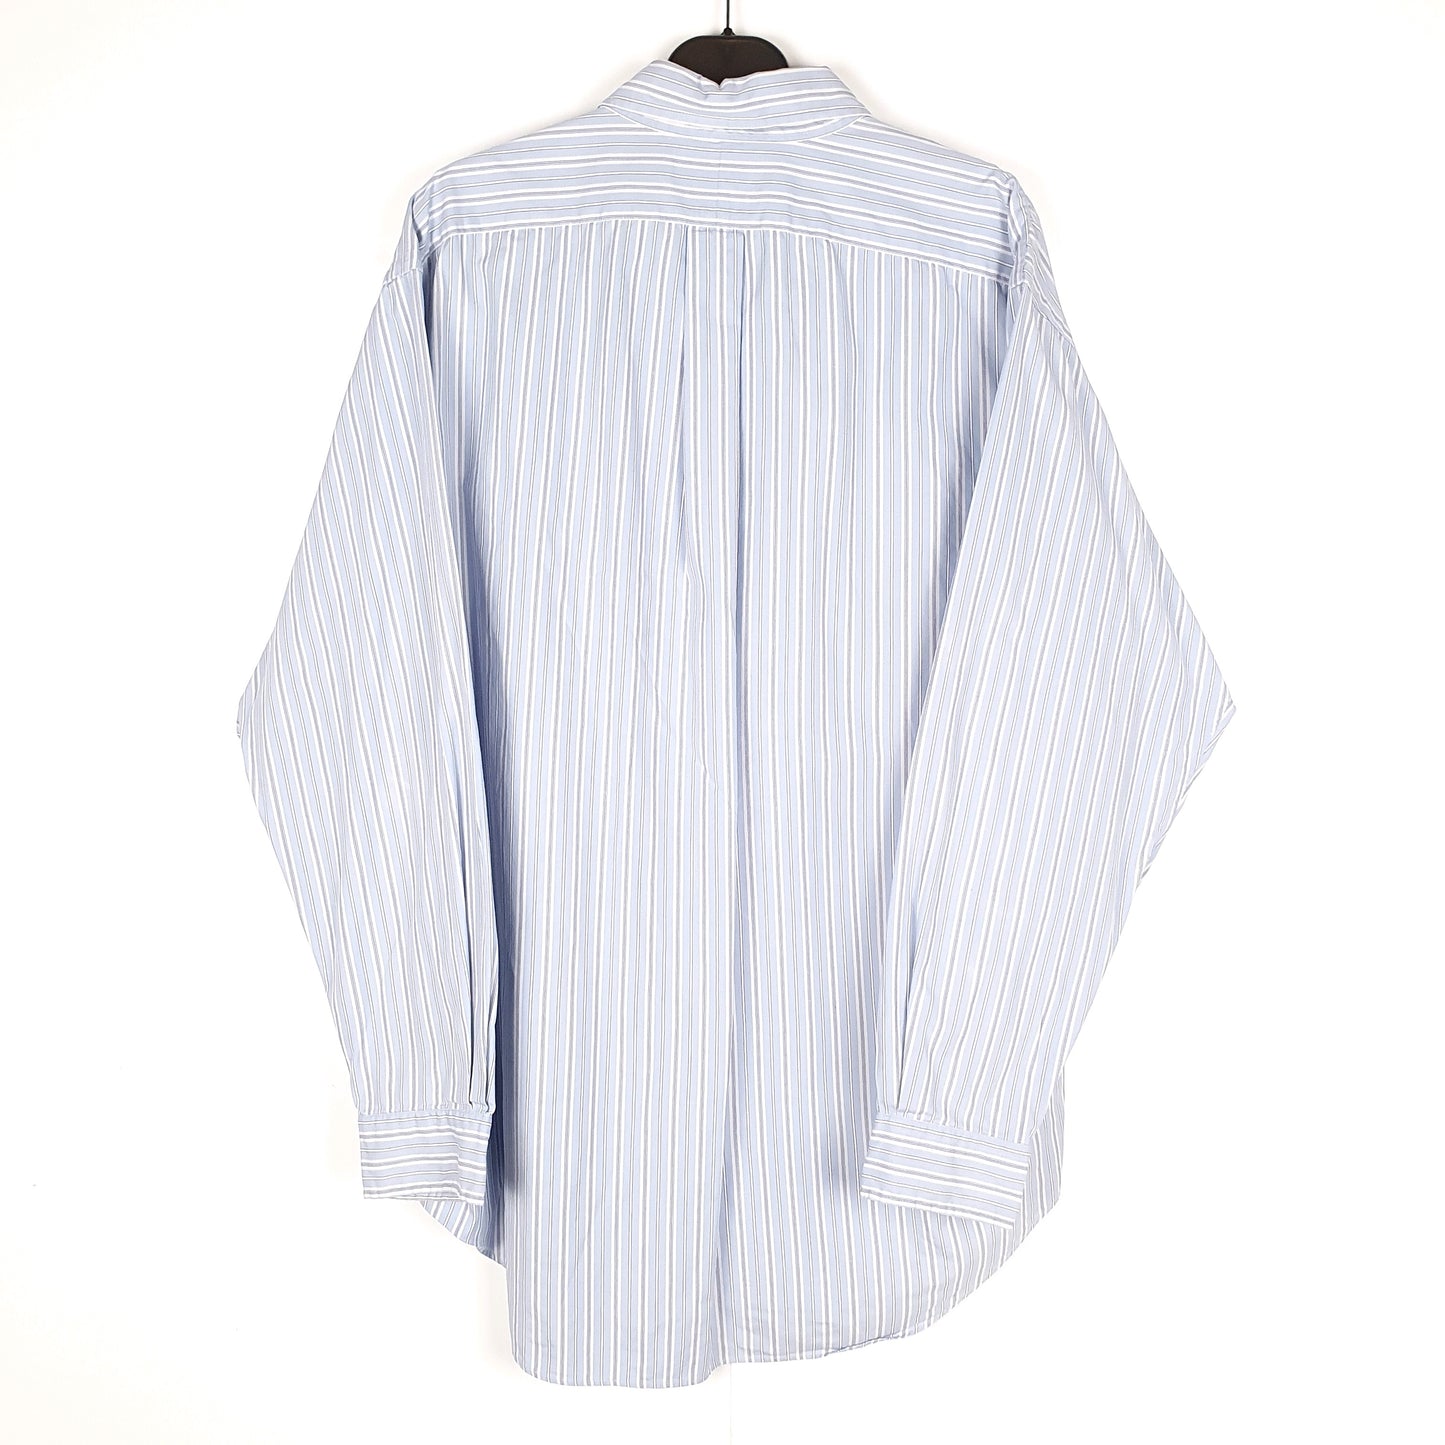 Polo Ralph Lauren Long Sleeve Yarmouth Fit Striped Shirt